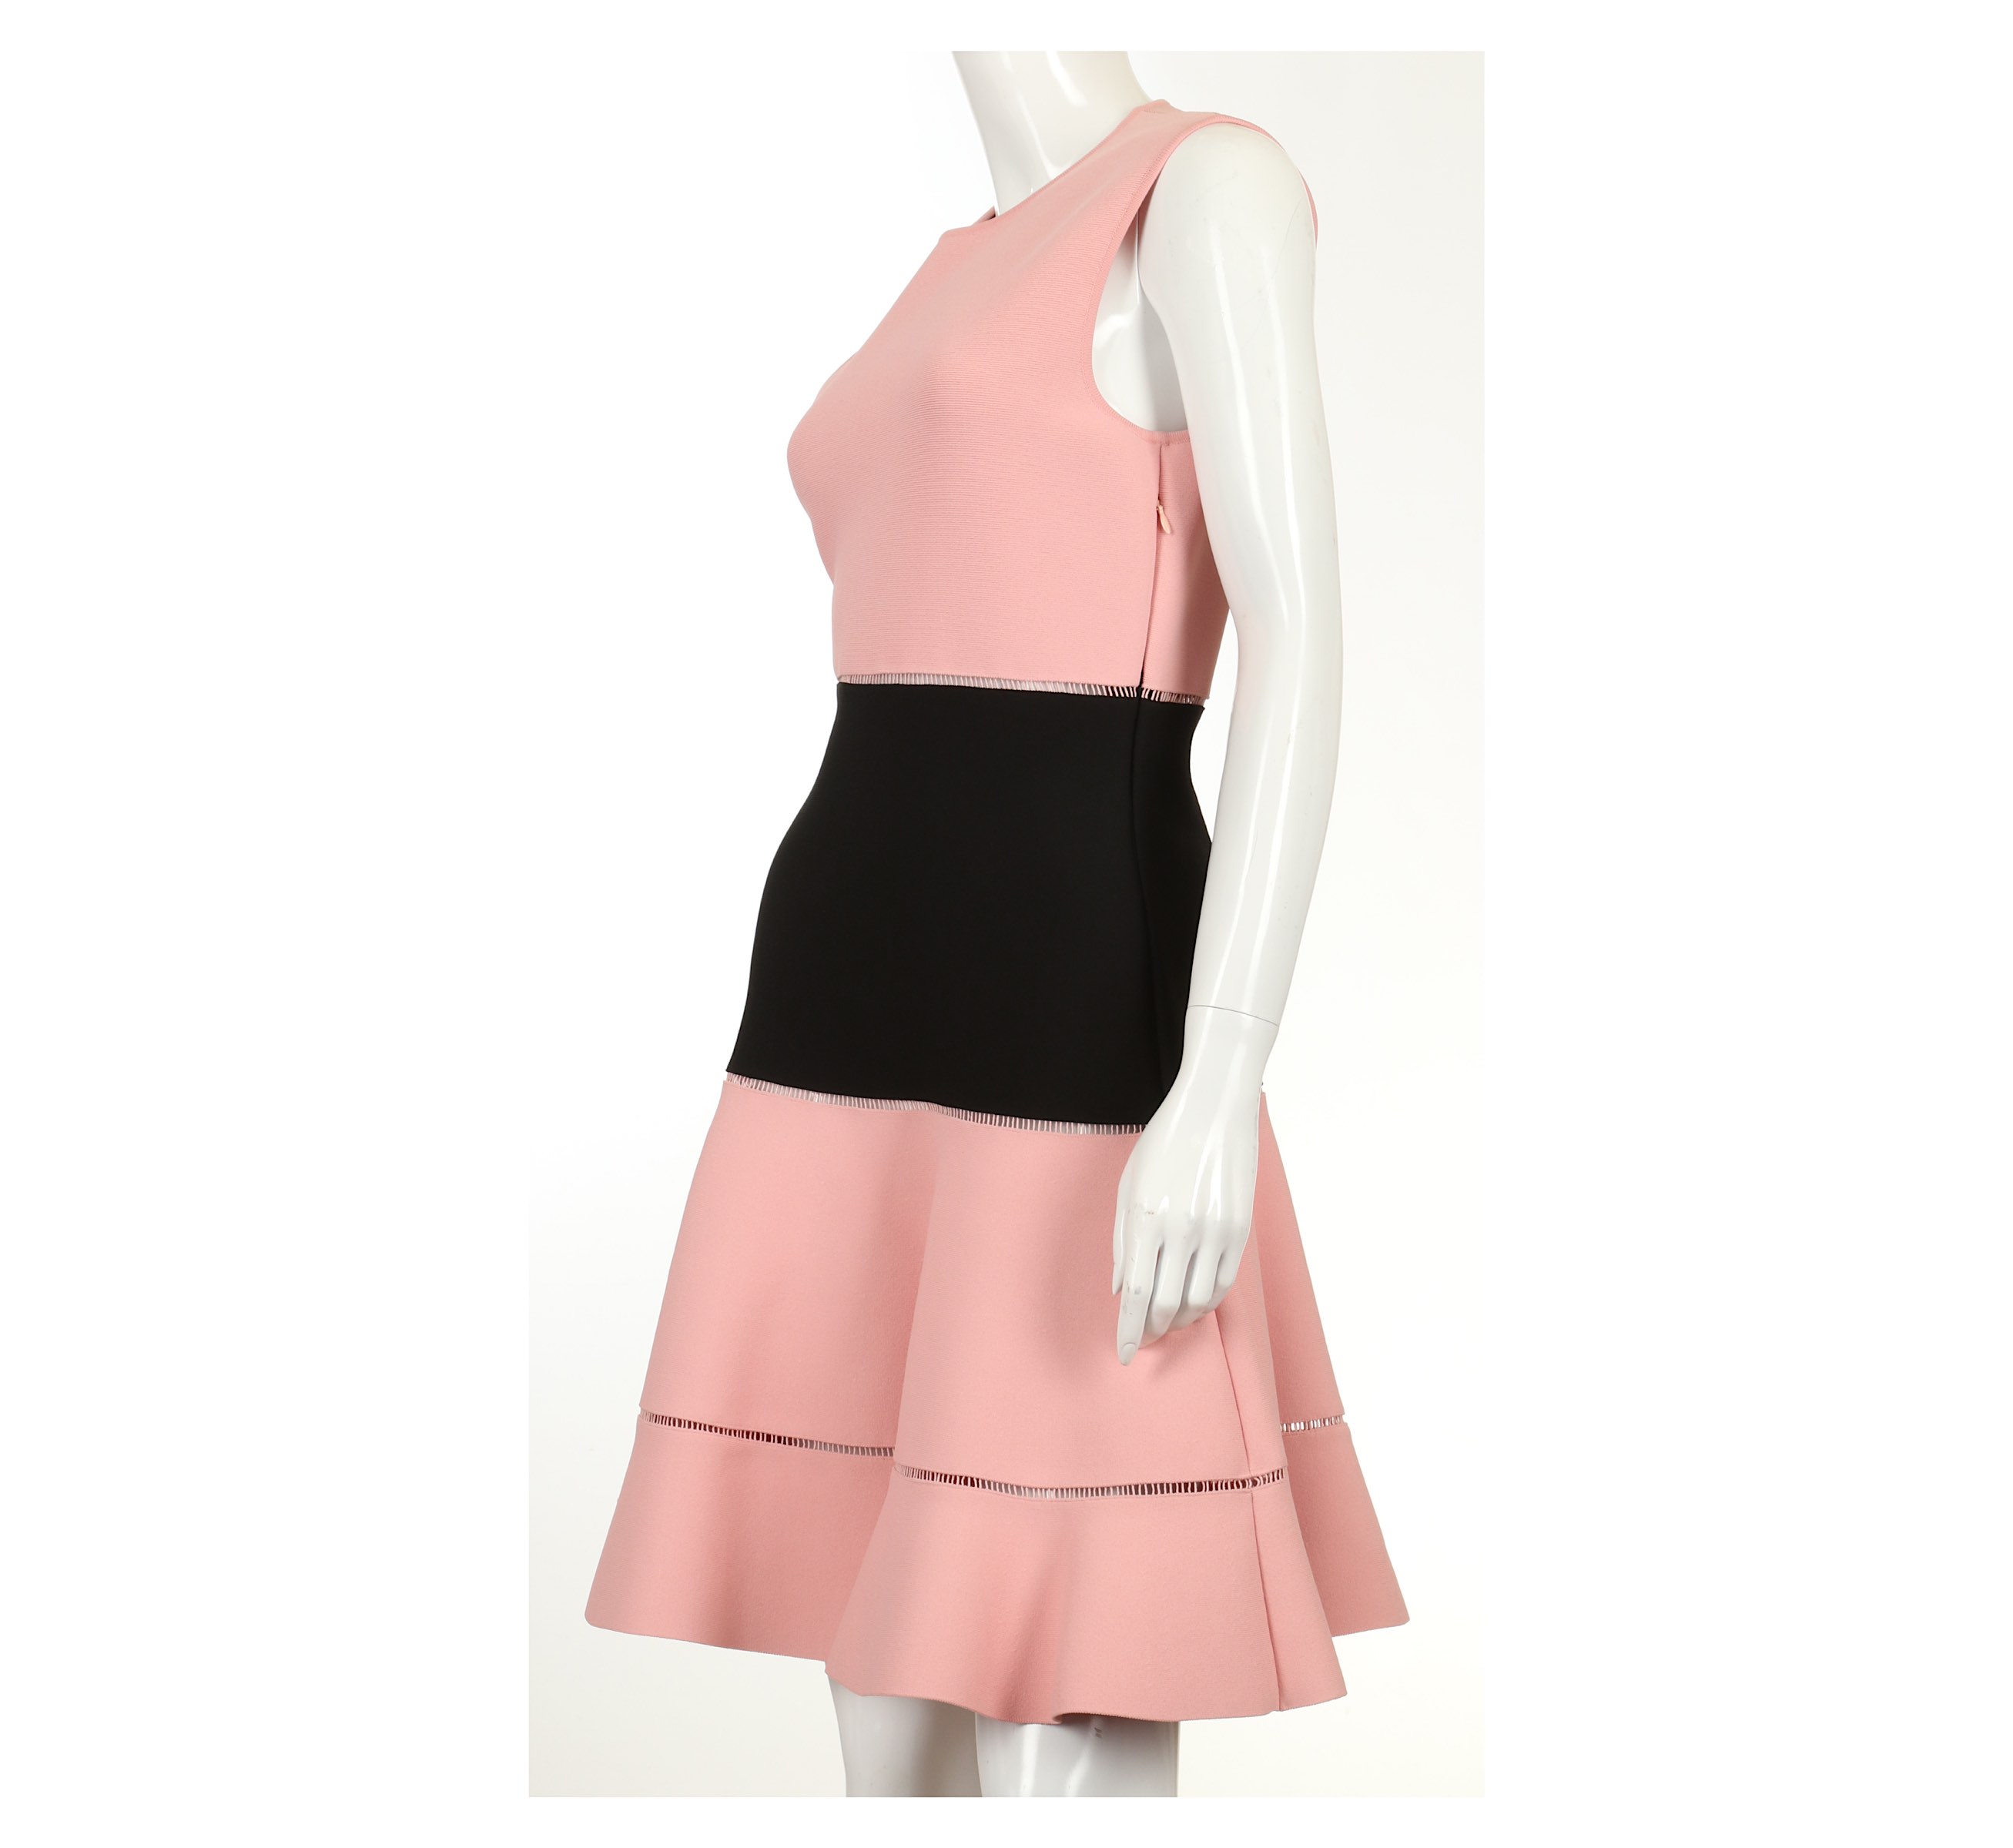 Alexander McQueen Pink and Black Dress, sleeveless with flaring skirt, labelled size XL, 17"/43cm - Image 4 of 8